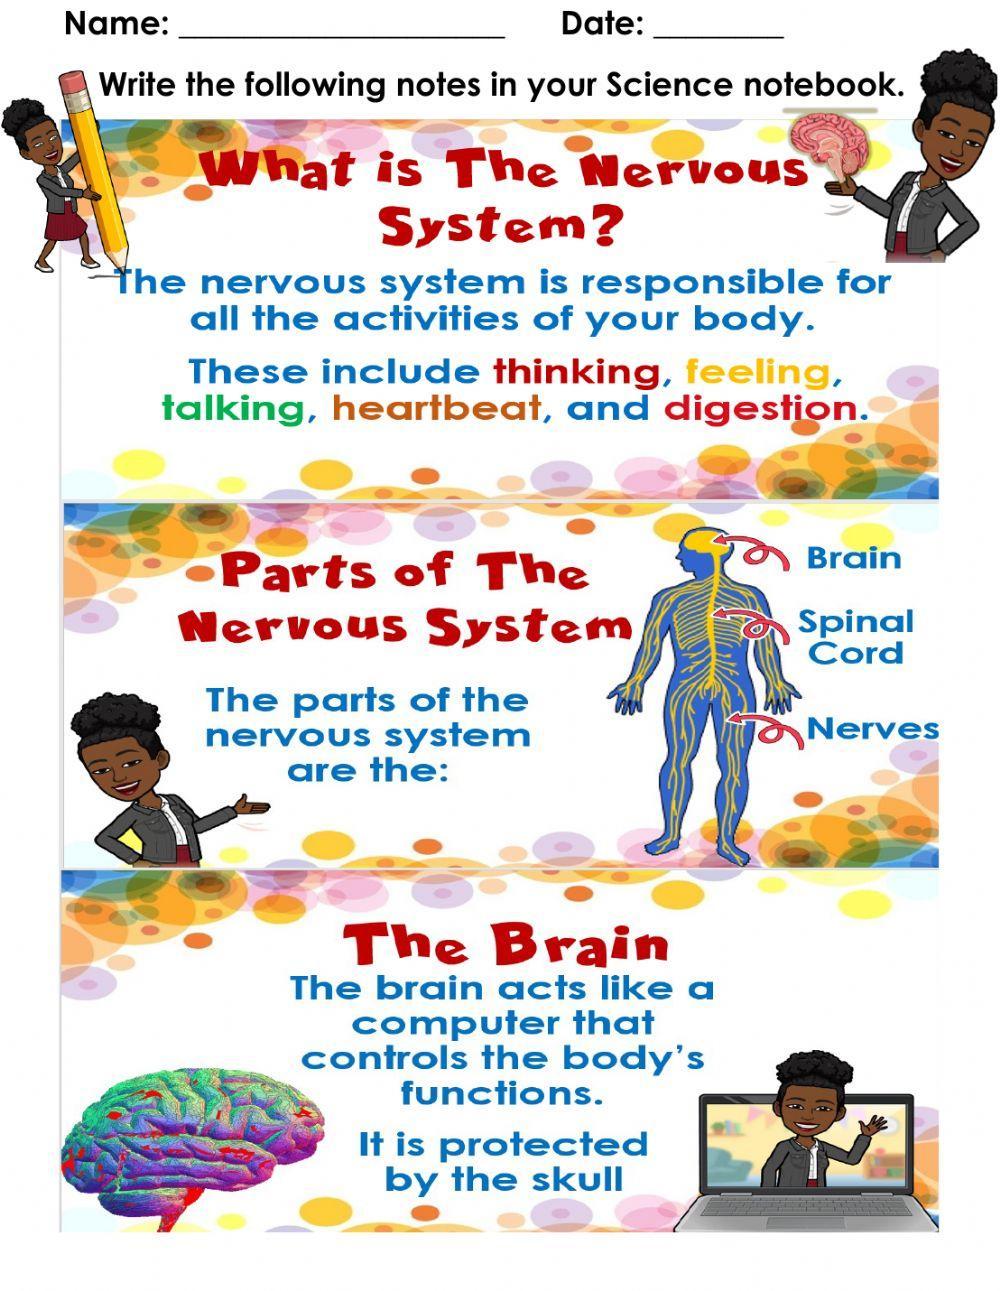 The Nervous System - Notes